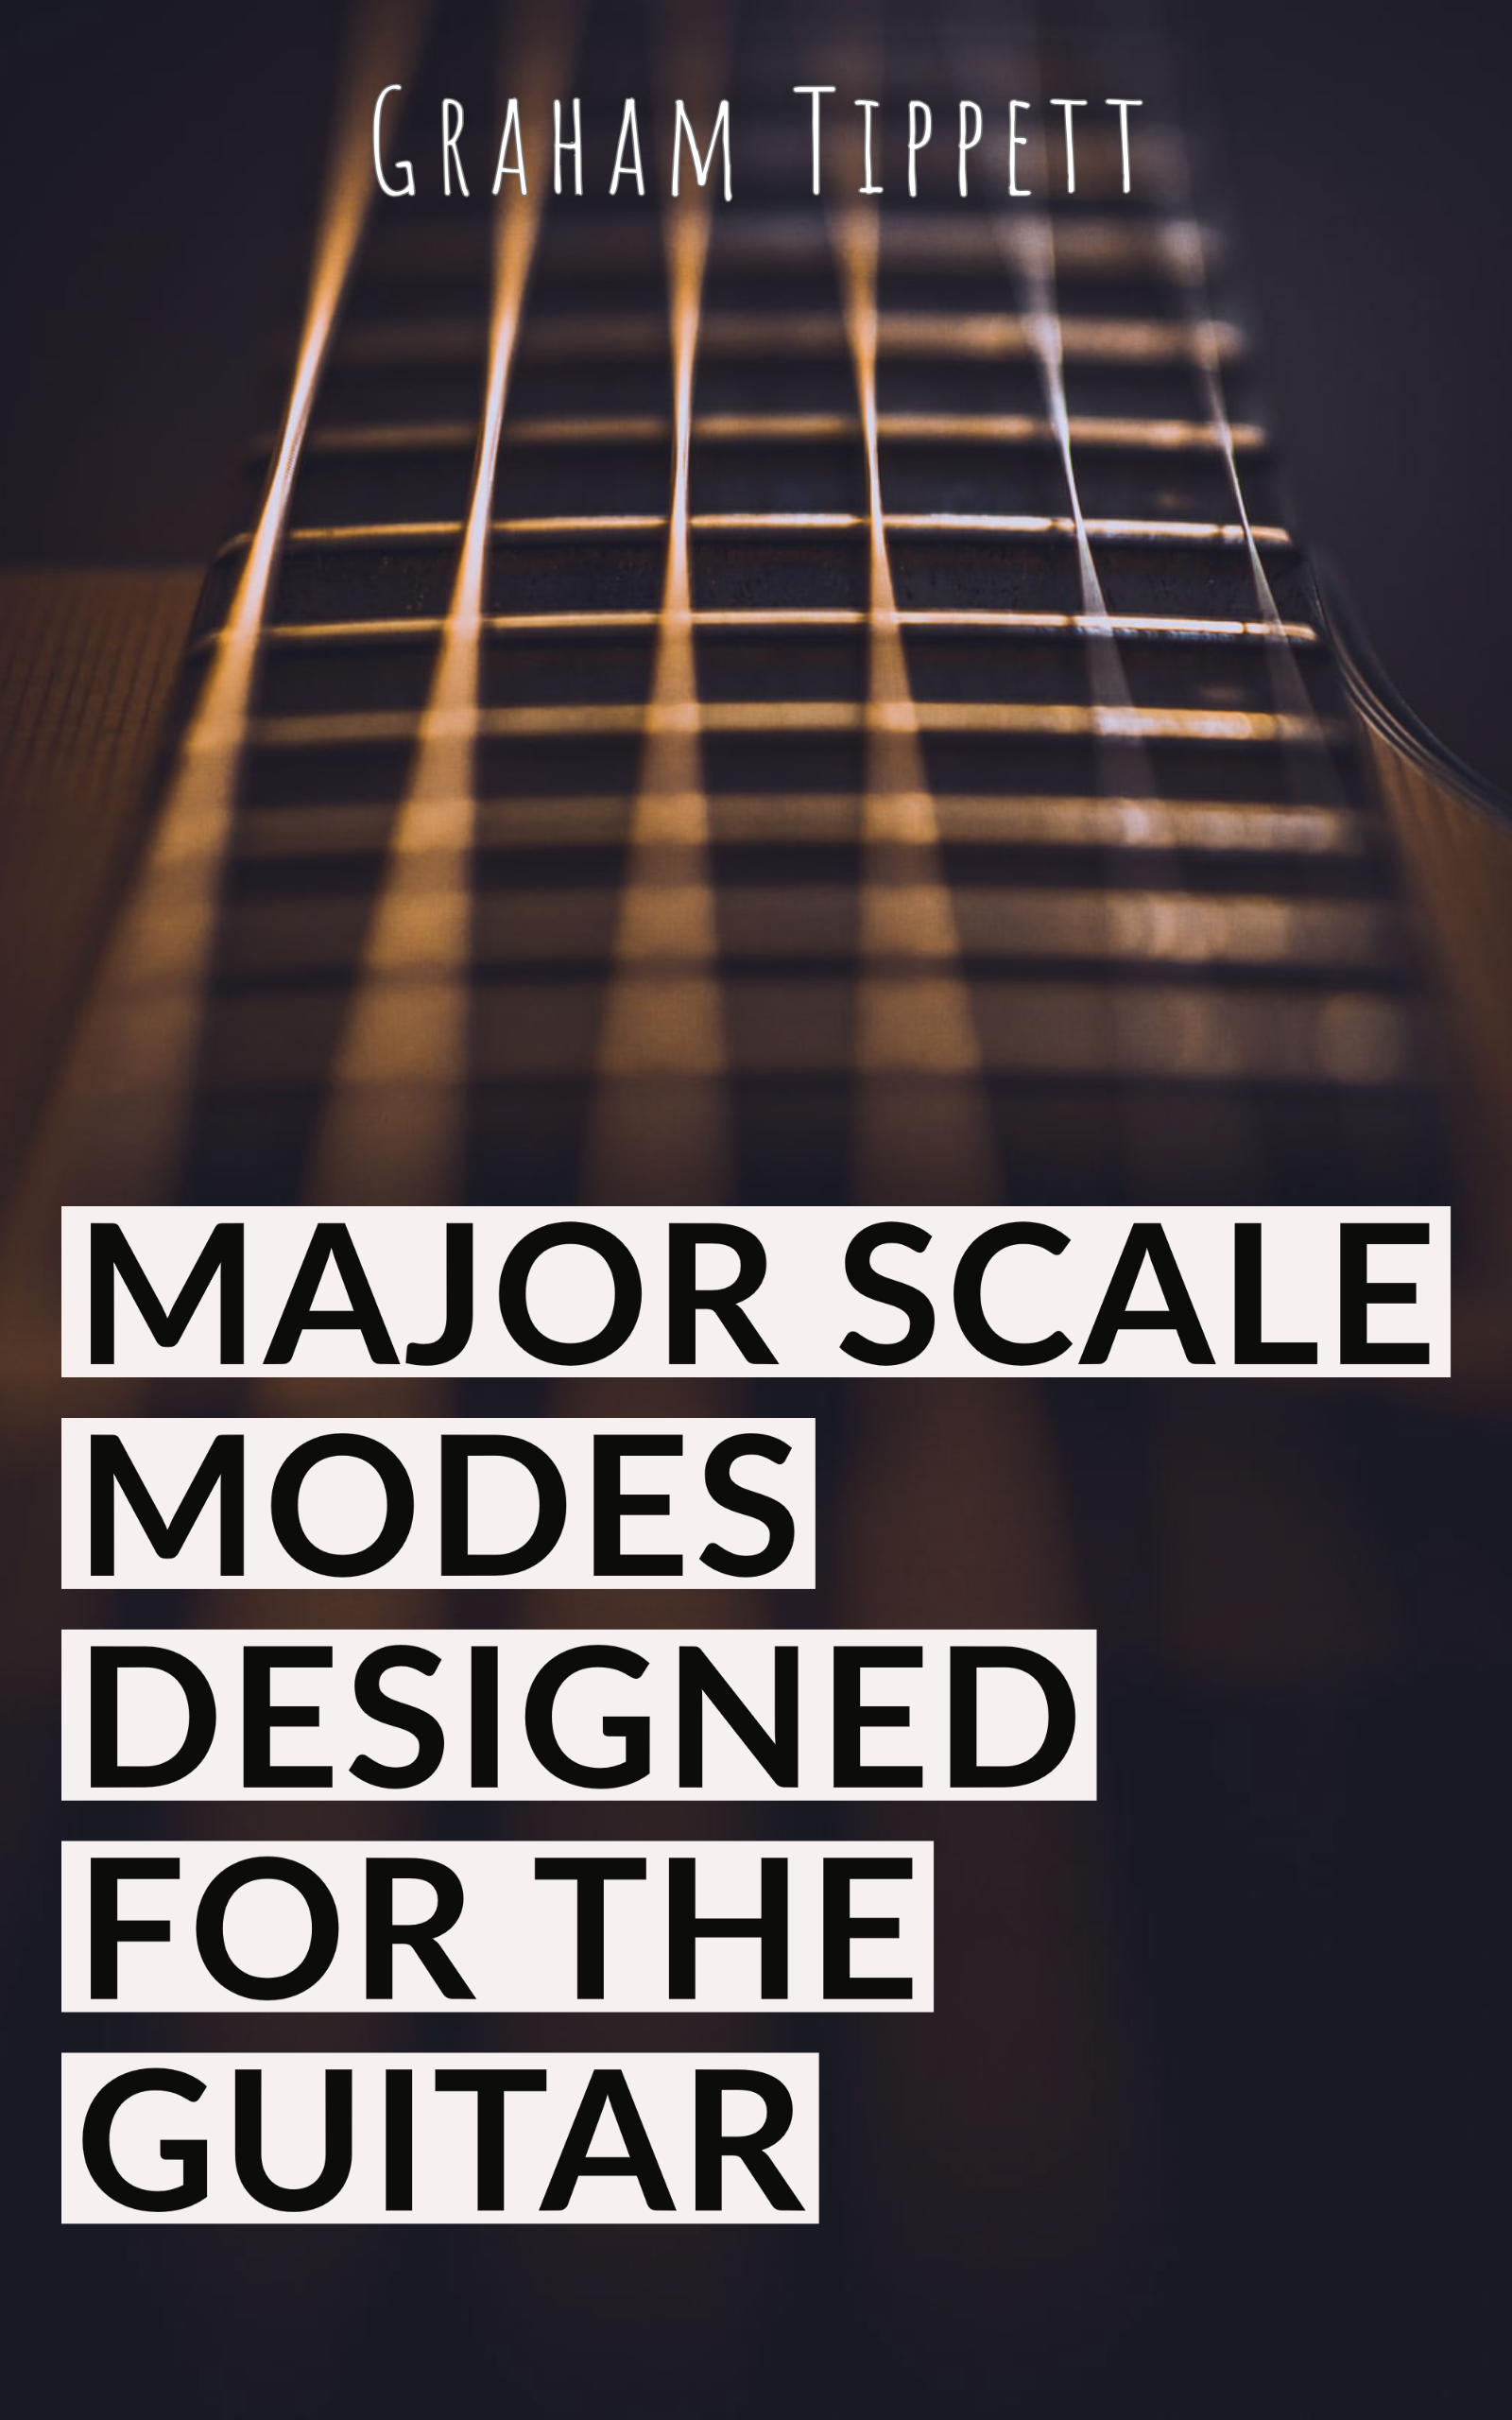 Major Scale Modes Designed for the Guitar